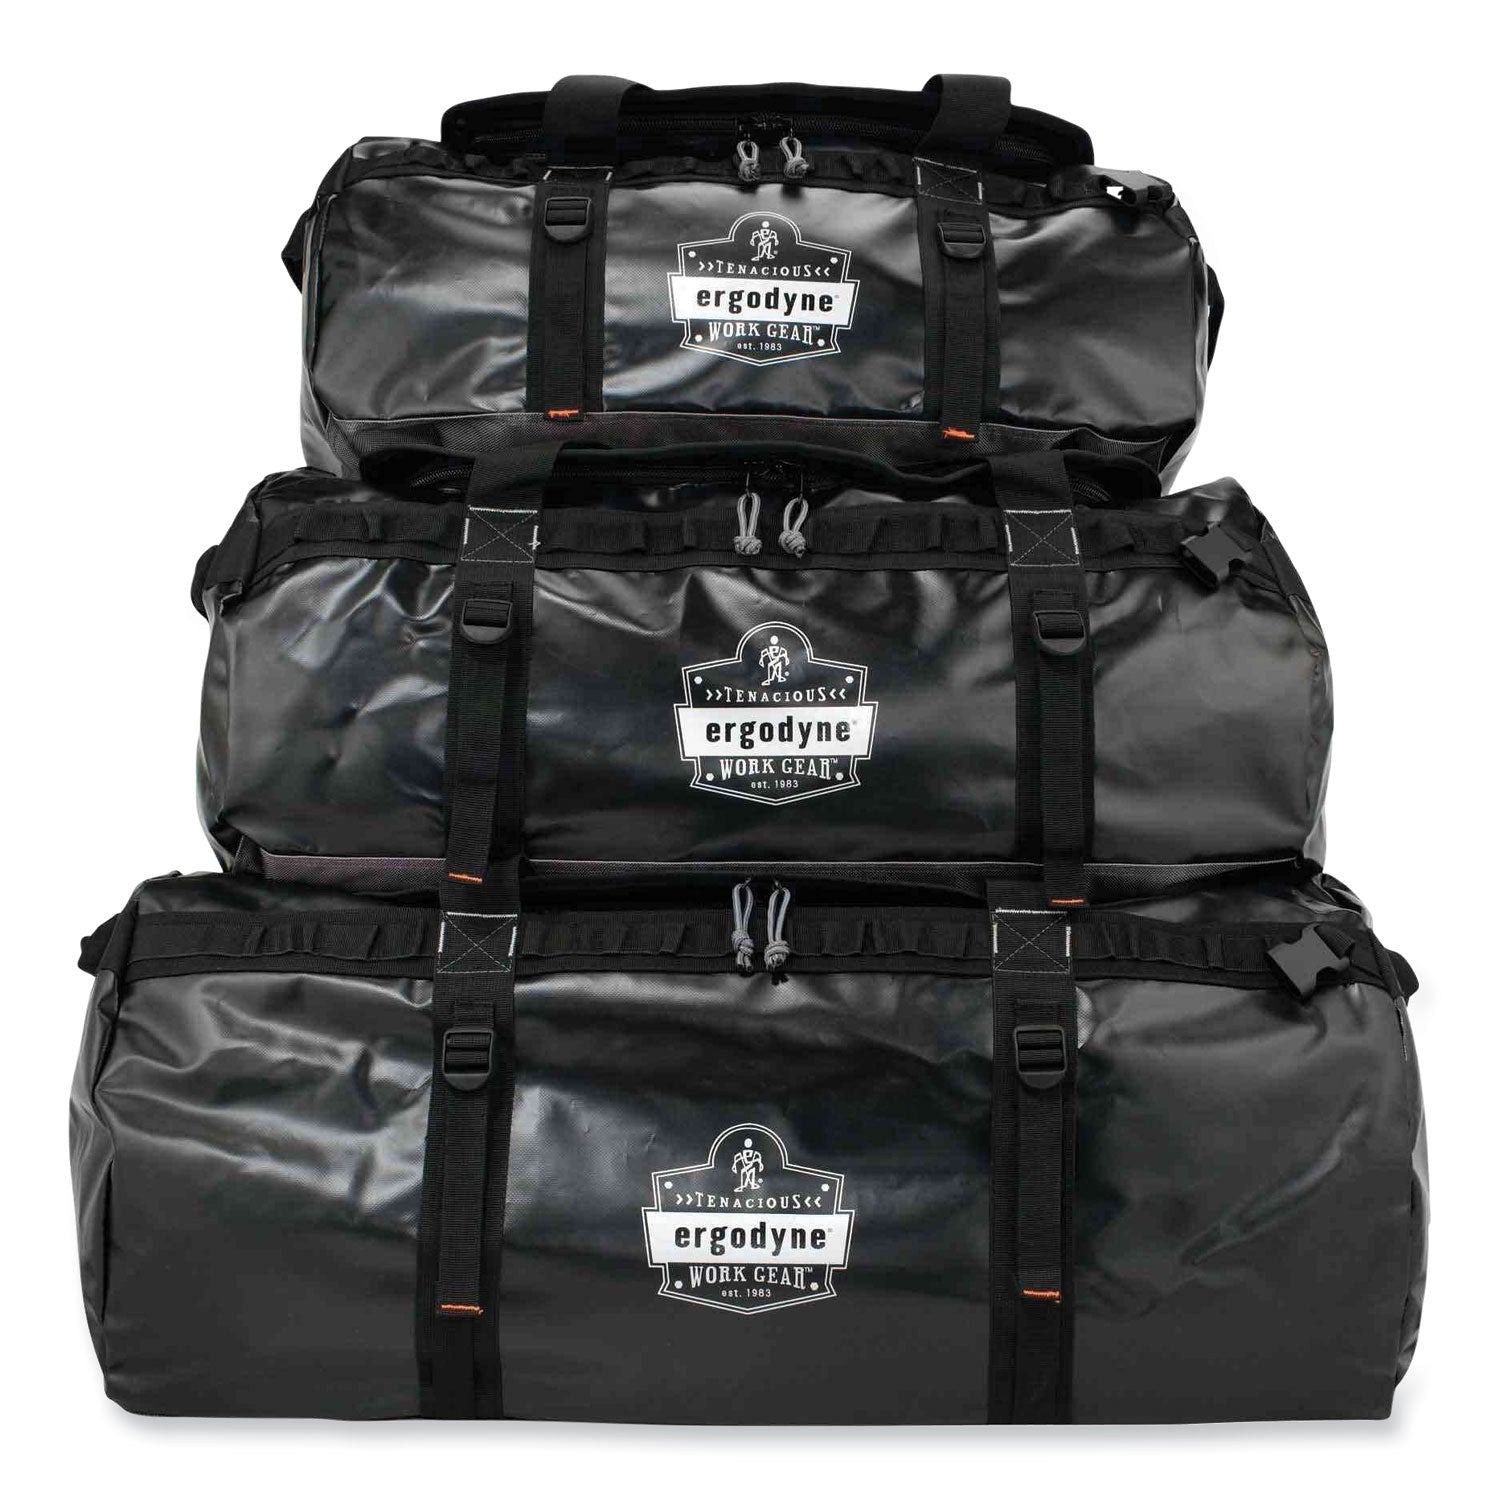 arsenal-5030-water-resistant-duffel-bag-large-185-x-31-x-185-black-ships-in-1-3-business-days_ego13034 - 4